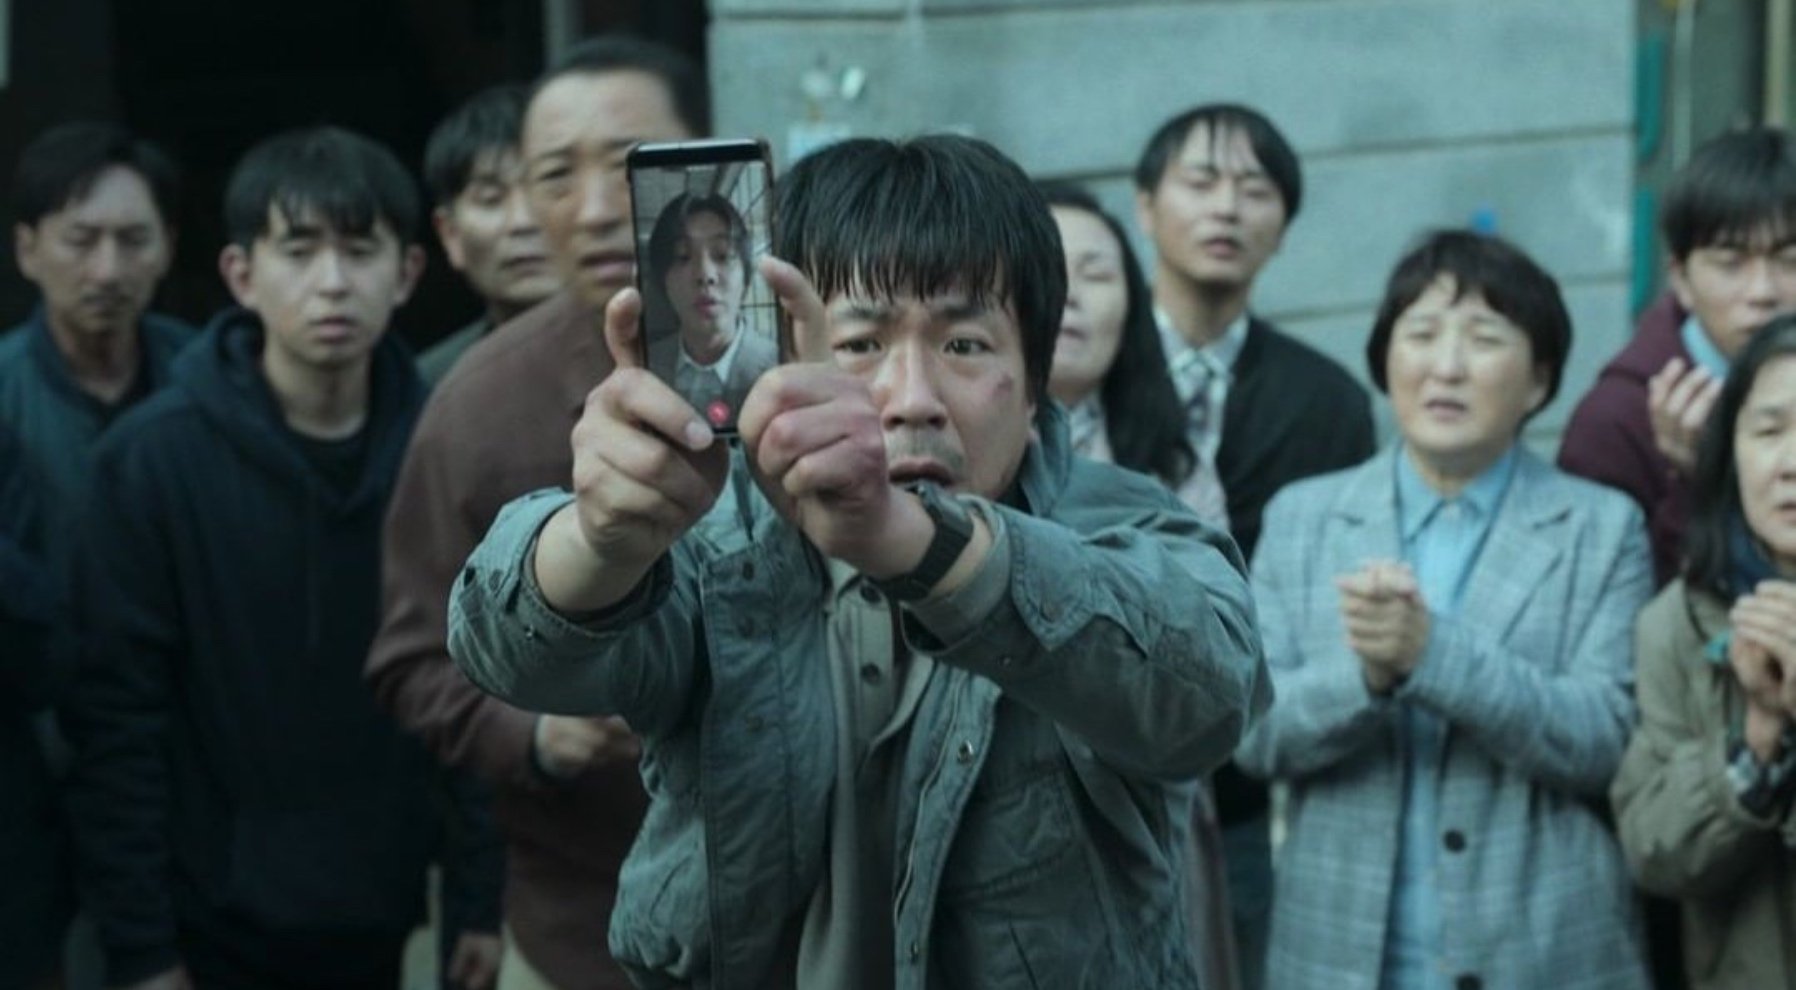 'Hellbound' Netflix K-drama still image of man holding up cellphone to the public.